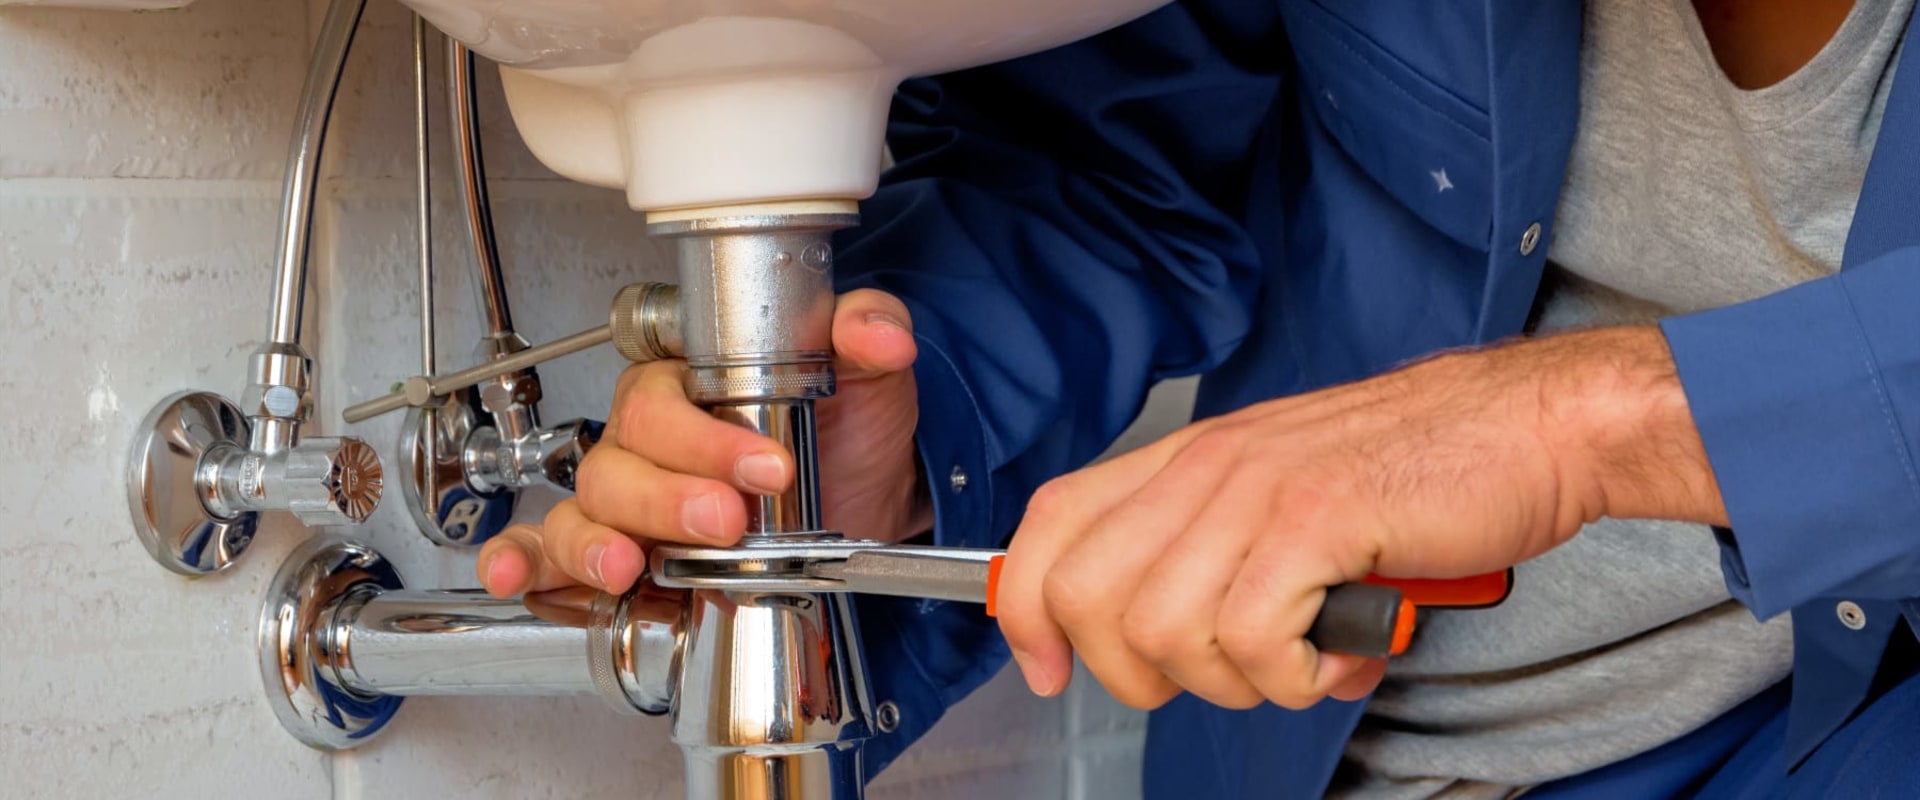 Comparing Plumbing Services: Finding an Affordable Option